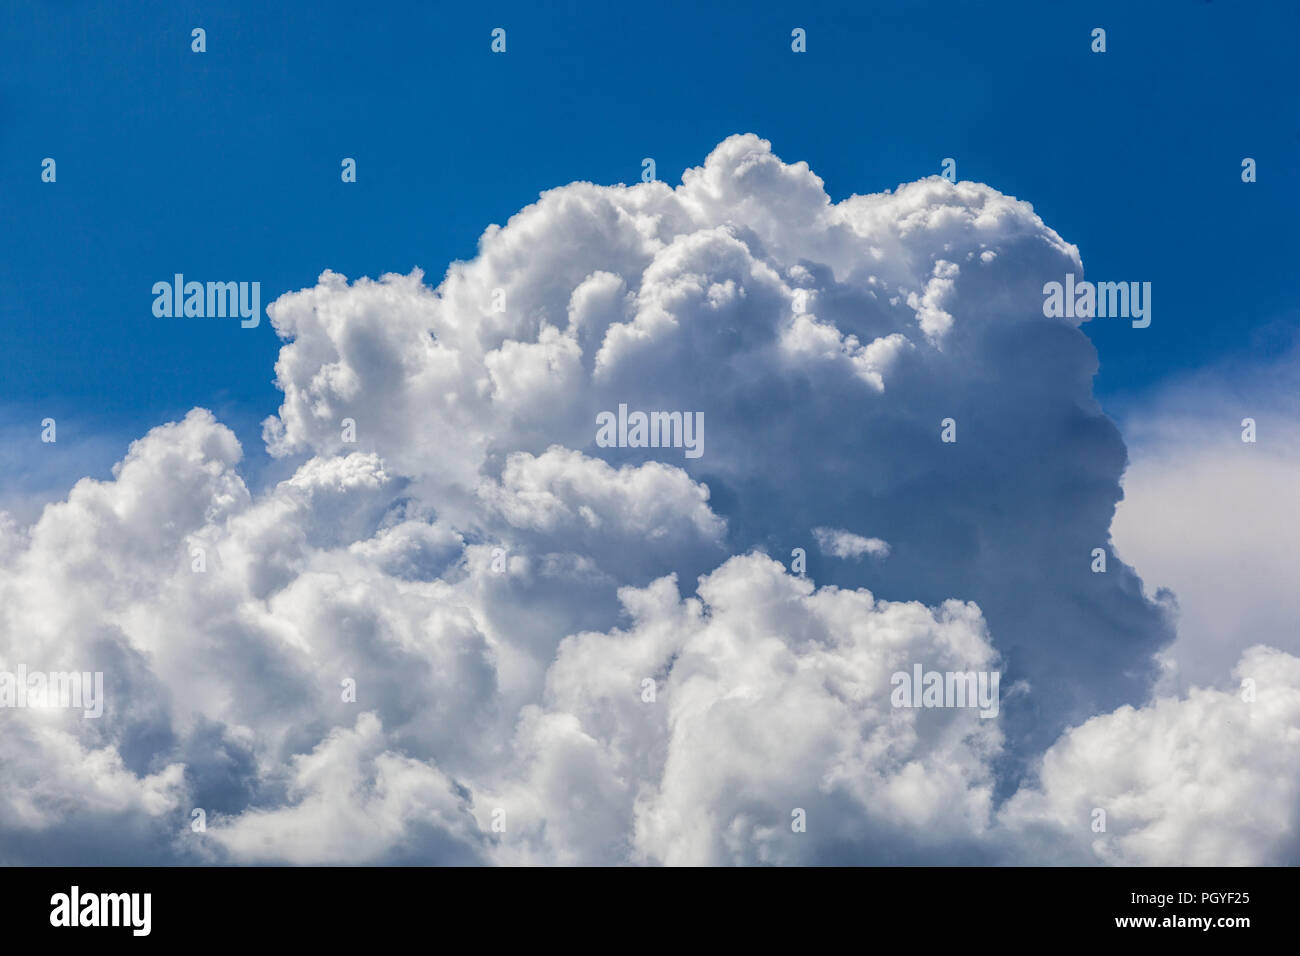 Formation of storm clouds shapes Fluffy white cumulus clouds in blue sky Summer weather Stock Photo